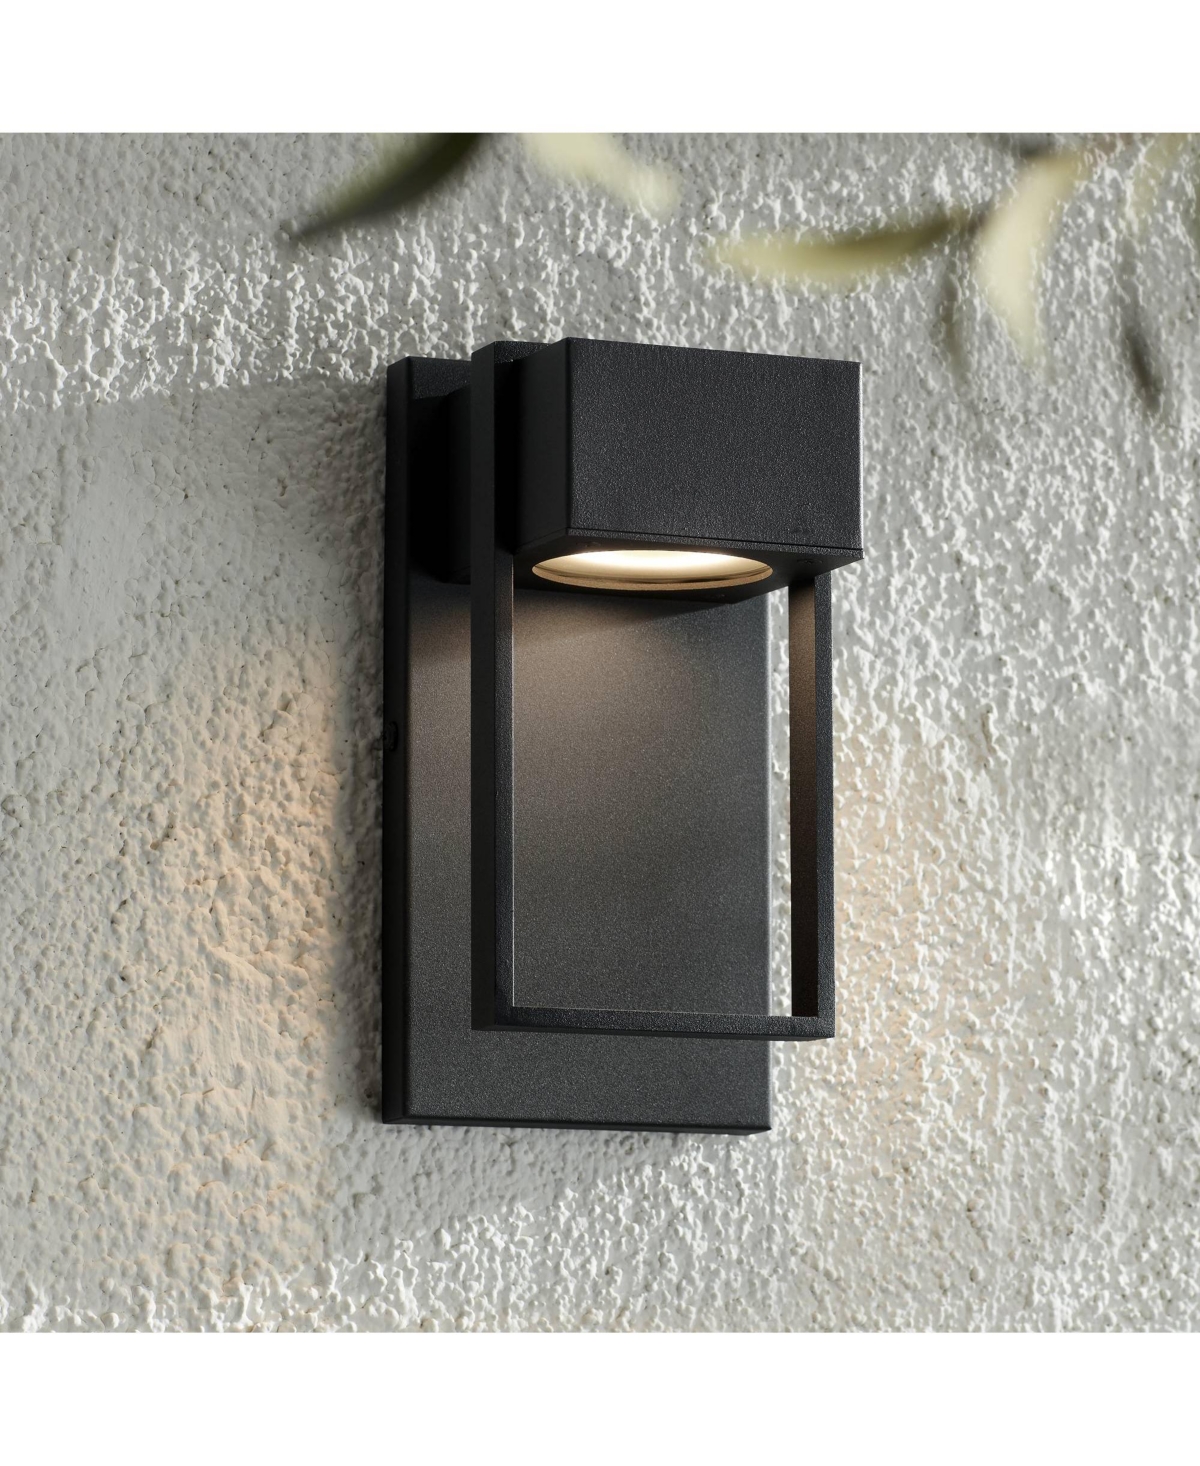 Pavel Modern Sconce Outdoor Wall Light Fixture Led Textured Black Metal 9 1/2" Crystal Down light for Exterior House Porch Patio Outside Deck Garage Y